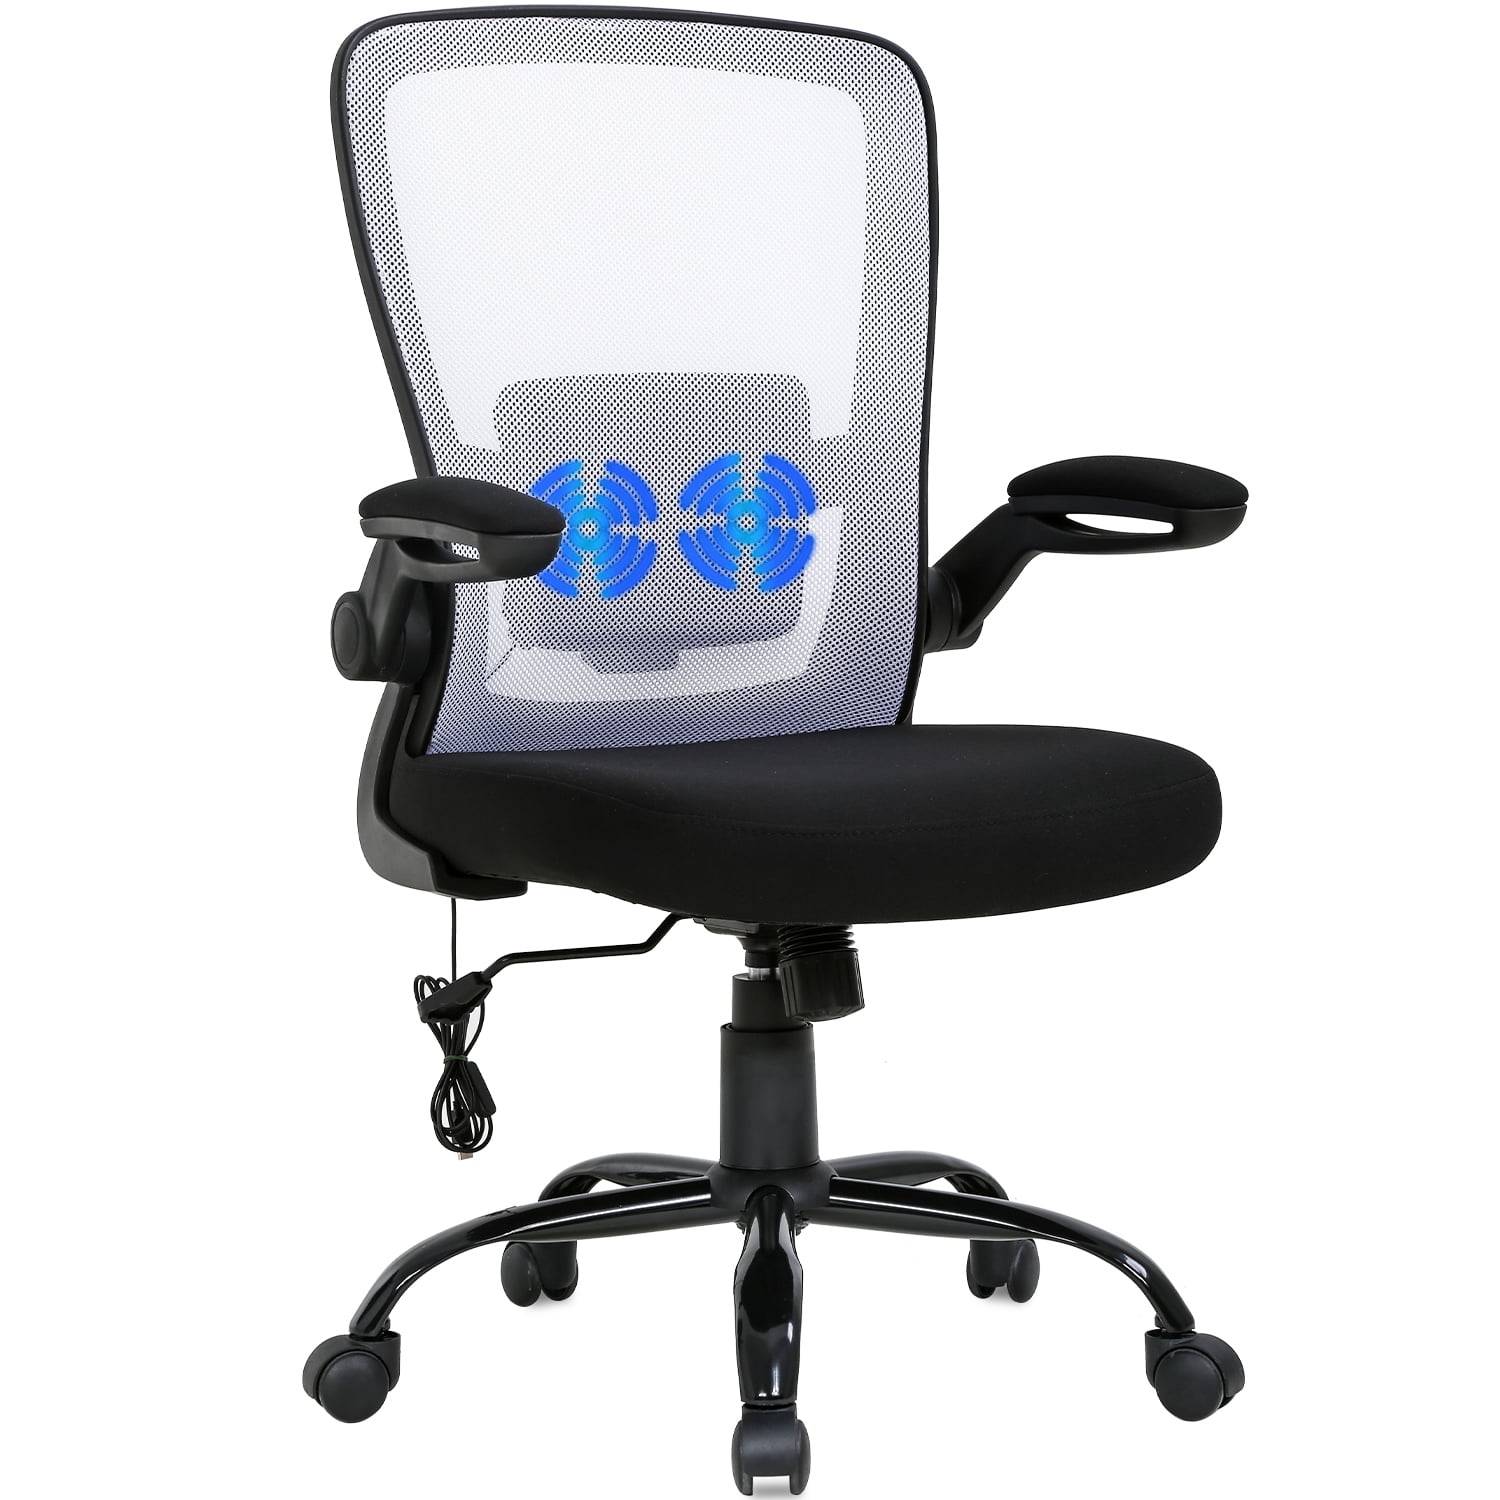 Home Office Chair Ergonomic Desk Chair Massage Computer Chair Swivel Rolling Executive Task Chair with Lumbar Support Flip-up Arms Mid Back Height Adjustable Mesh Chair for Adults White